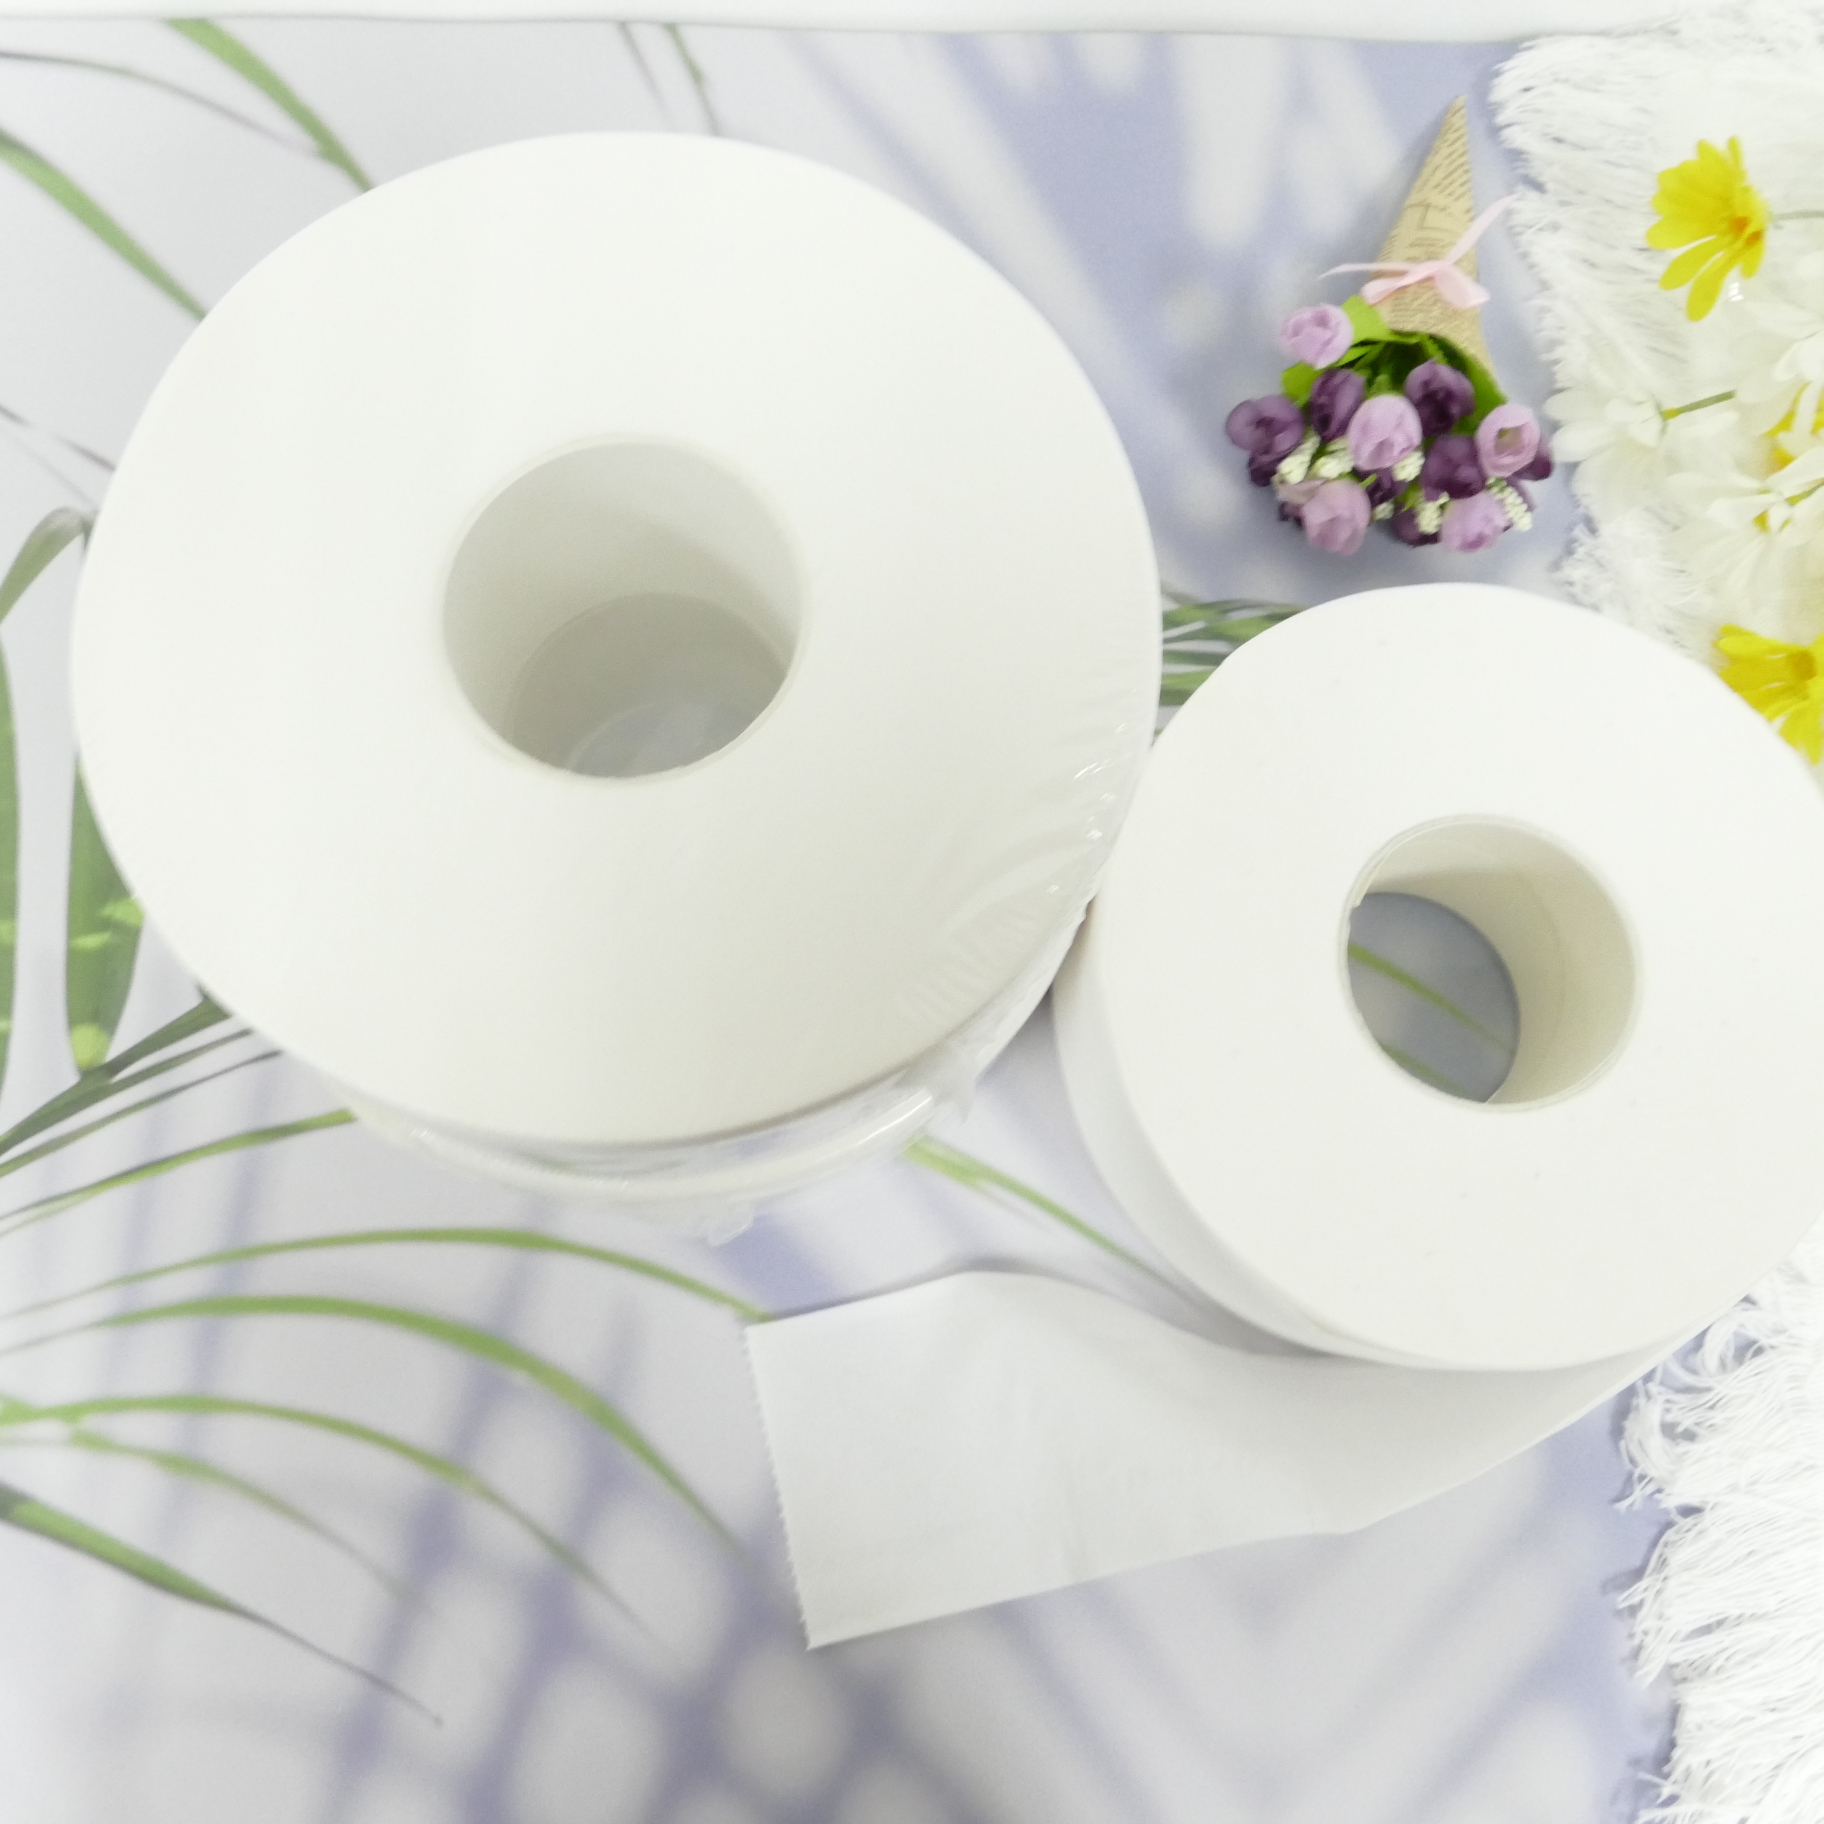 AFH-jumbo Toilet Roll 2 Ply hand towel roll bathroom roll with Virgin Pulp XPZ02-680-12